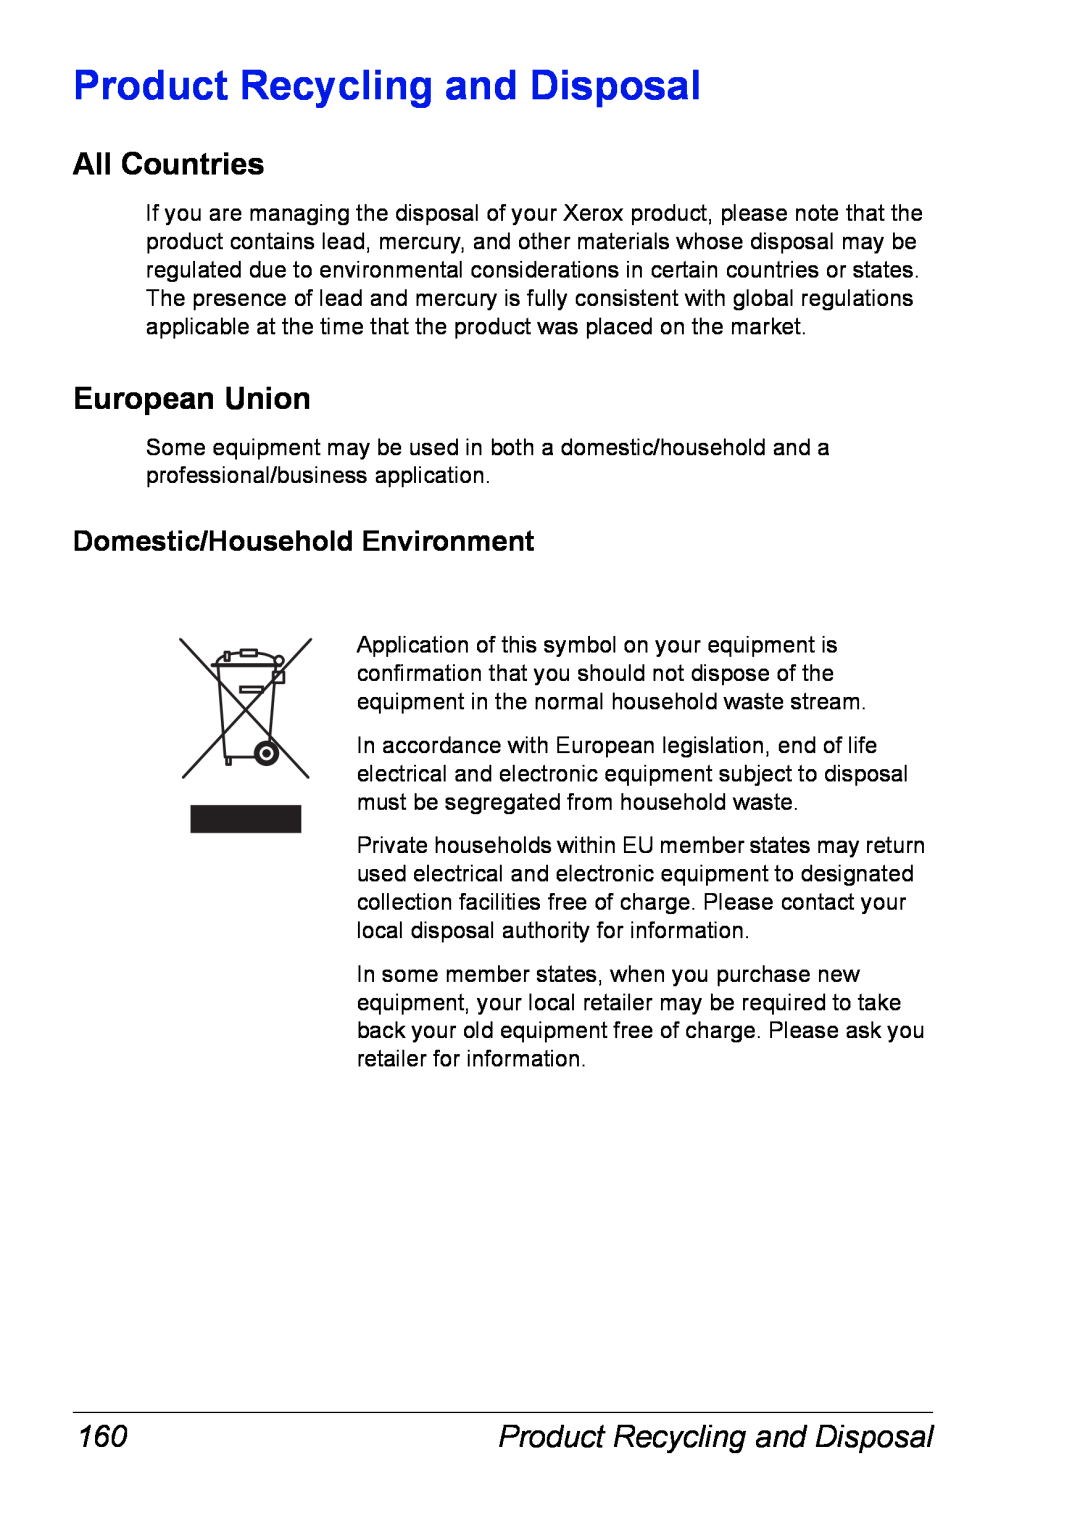 Xerox 6120 manual Product Recycling and Disposal, All Countries, European Union, Domestic/Household Environment 